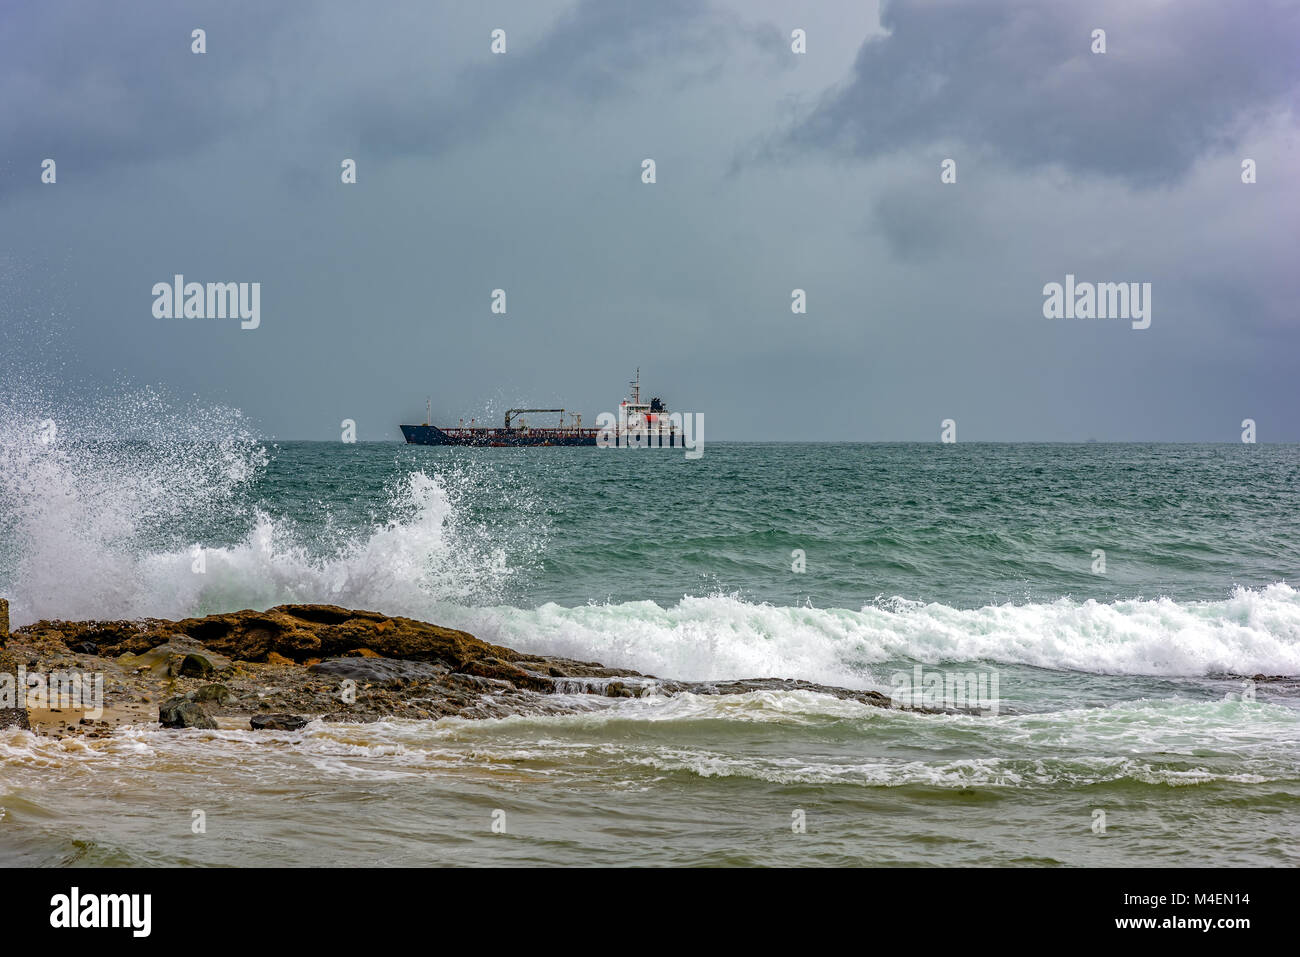 Ship stopped in bad weather Stock Photo